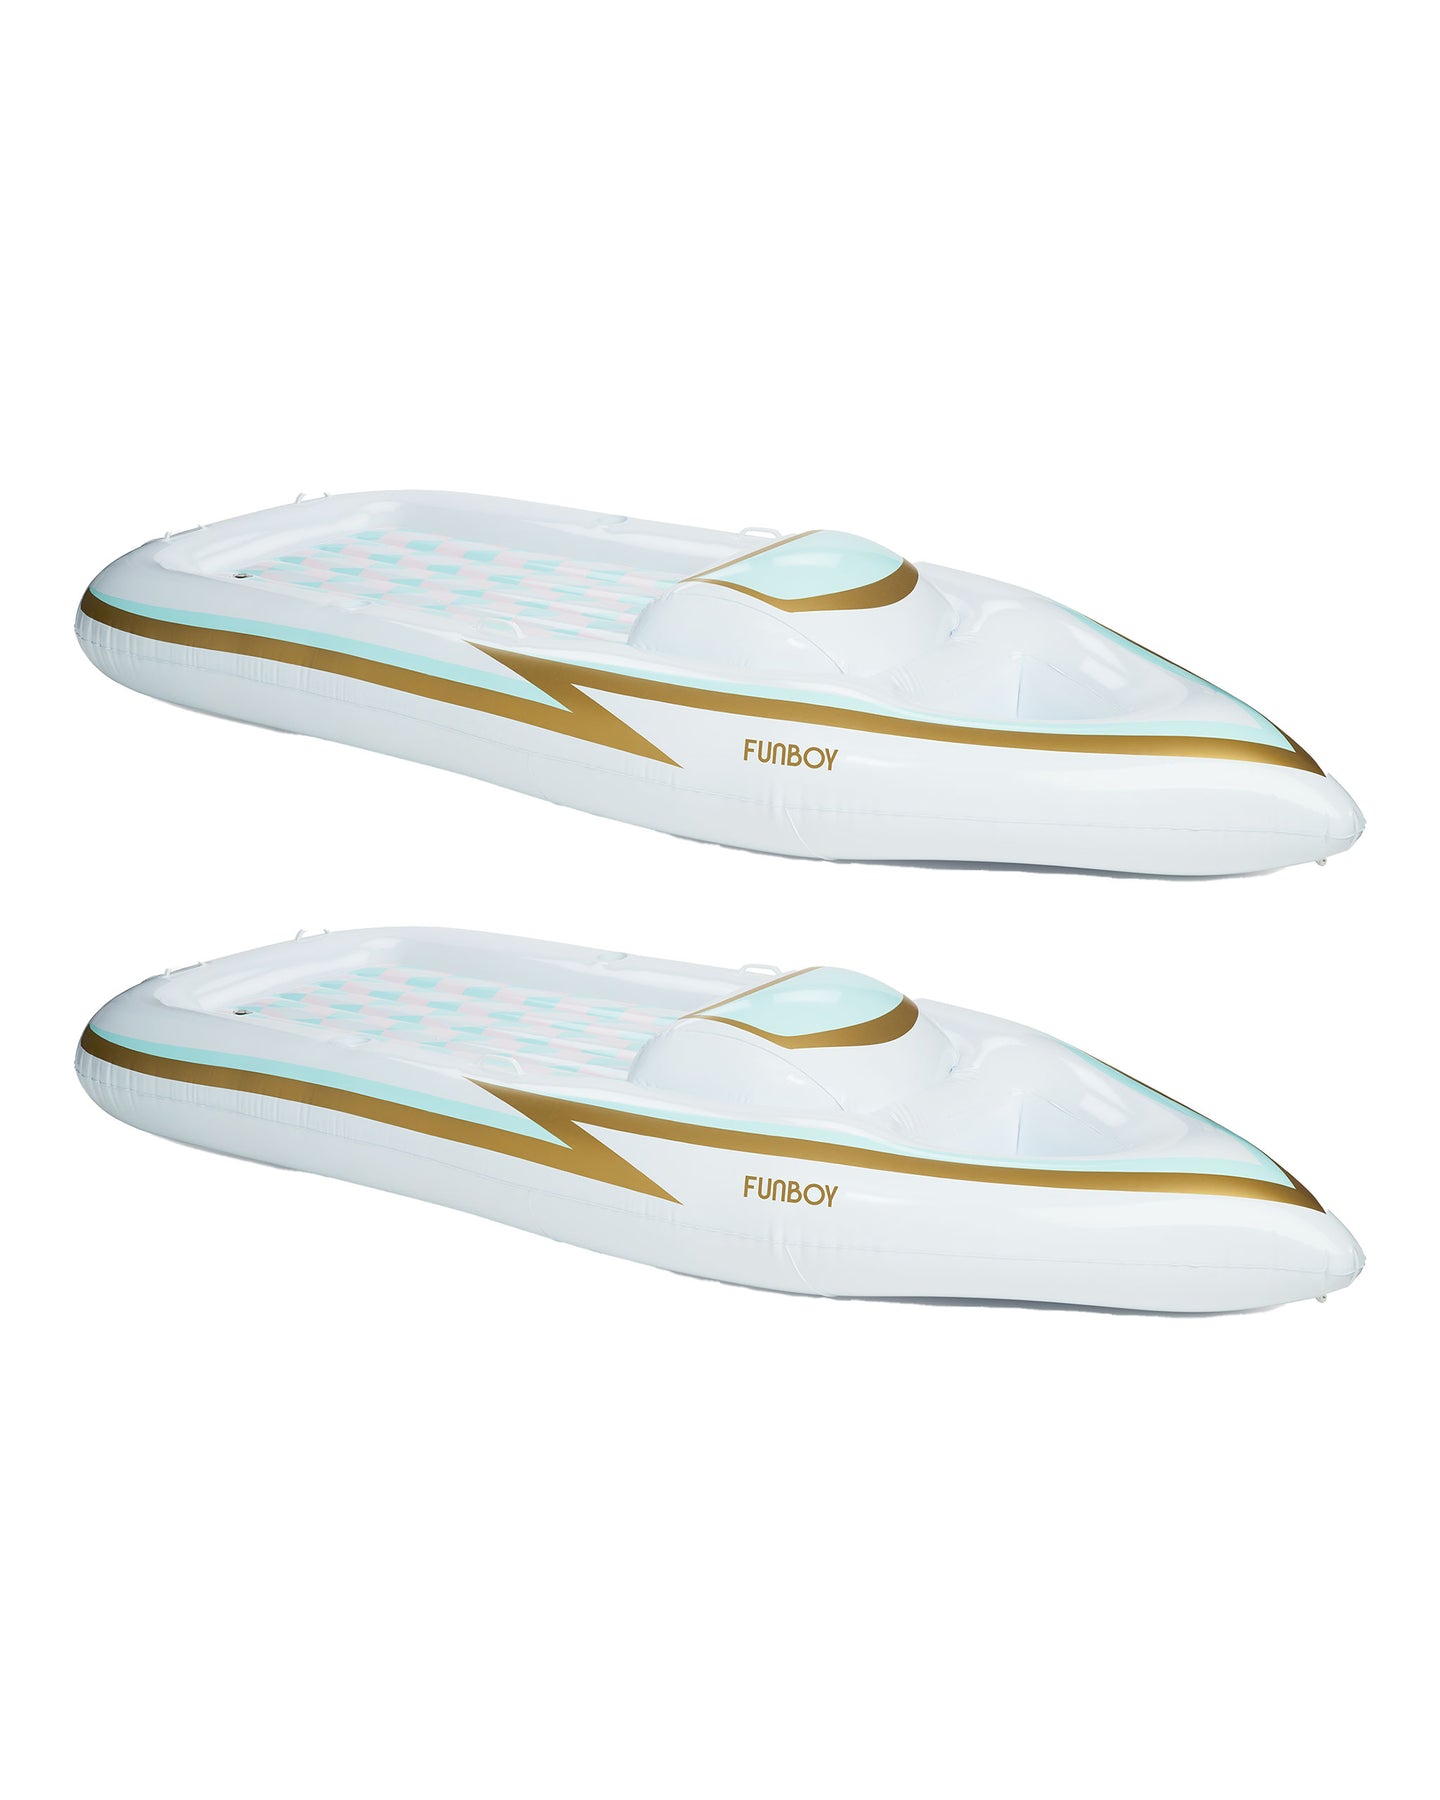 Buy Two & Save - Funboy Yacht Pool Float 